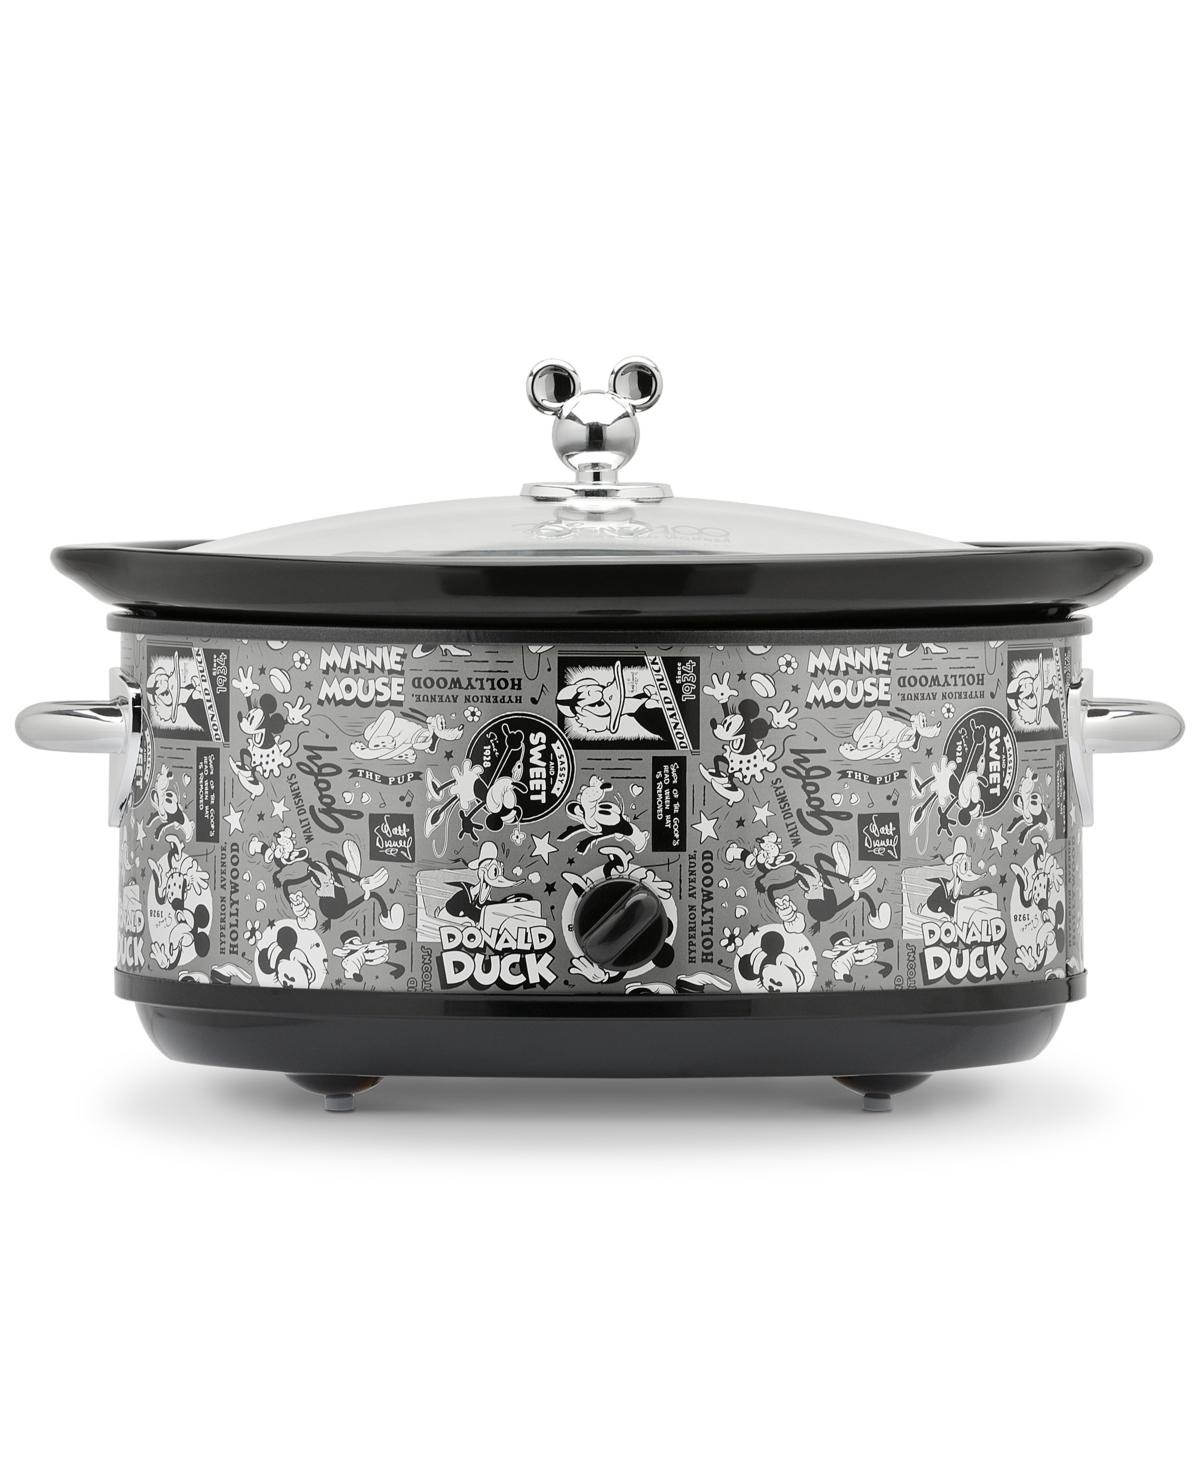 100 Anniversary 7-Qt. Mickey Mouse Slow Cooker - Black